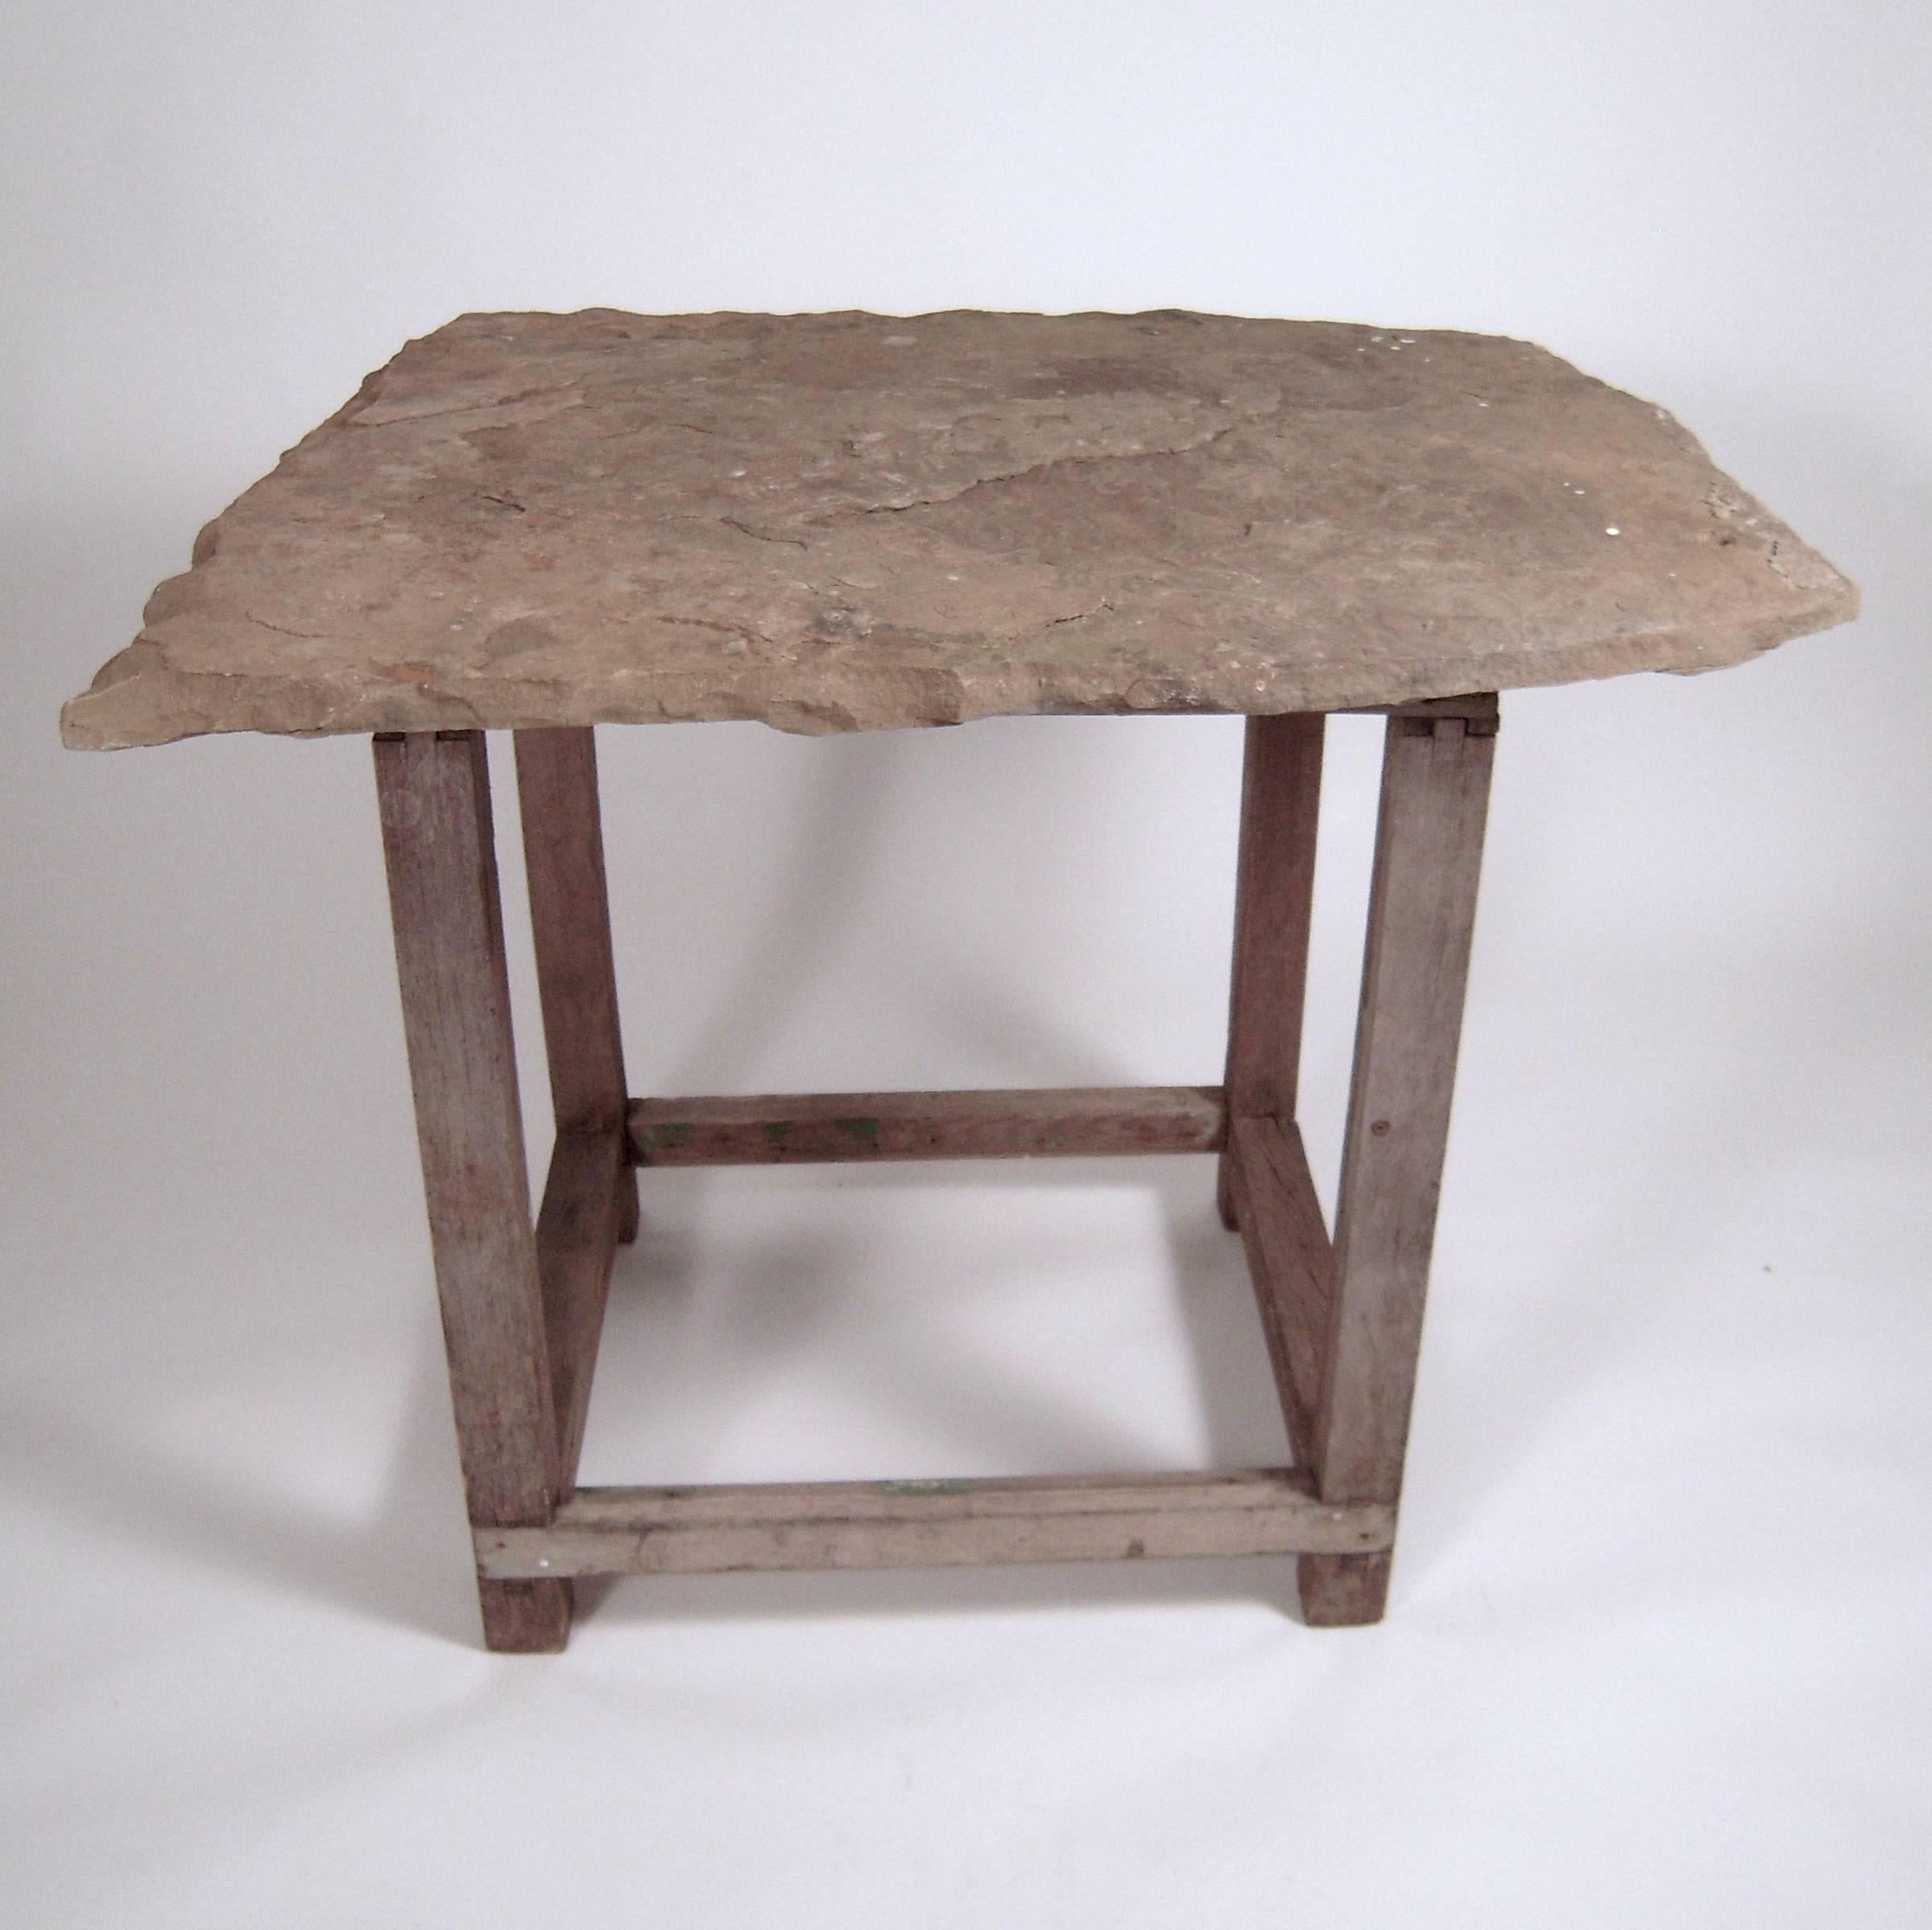 A table made from a massive, English roof slate tile top, mounted on a square section weathered oak base, the legs joined by cross stretchers. The tile is in its original form, with a small hole which was used when it functioned as a roof tile. The